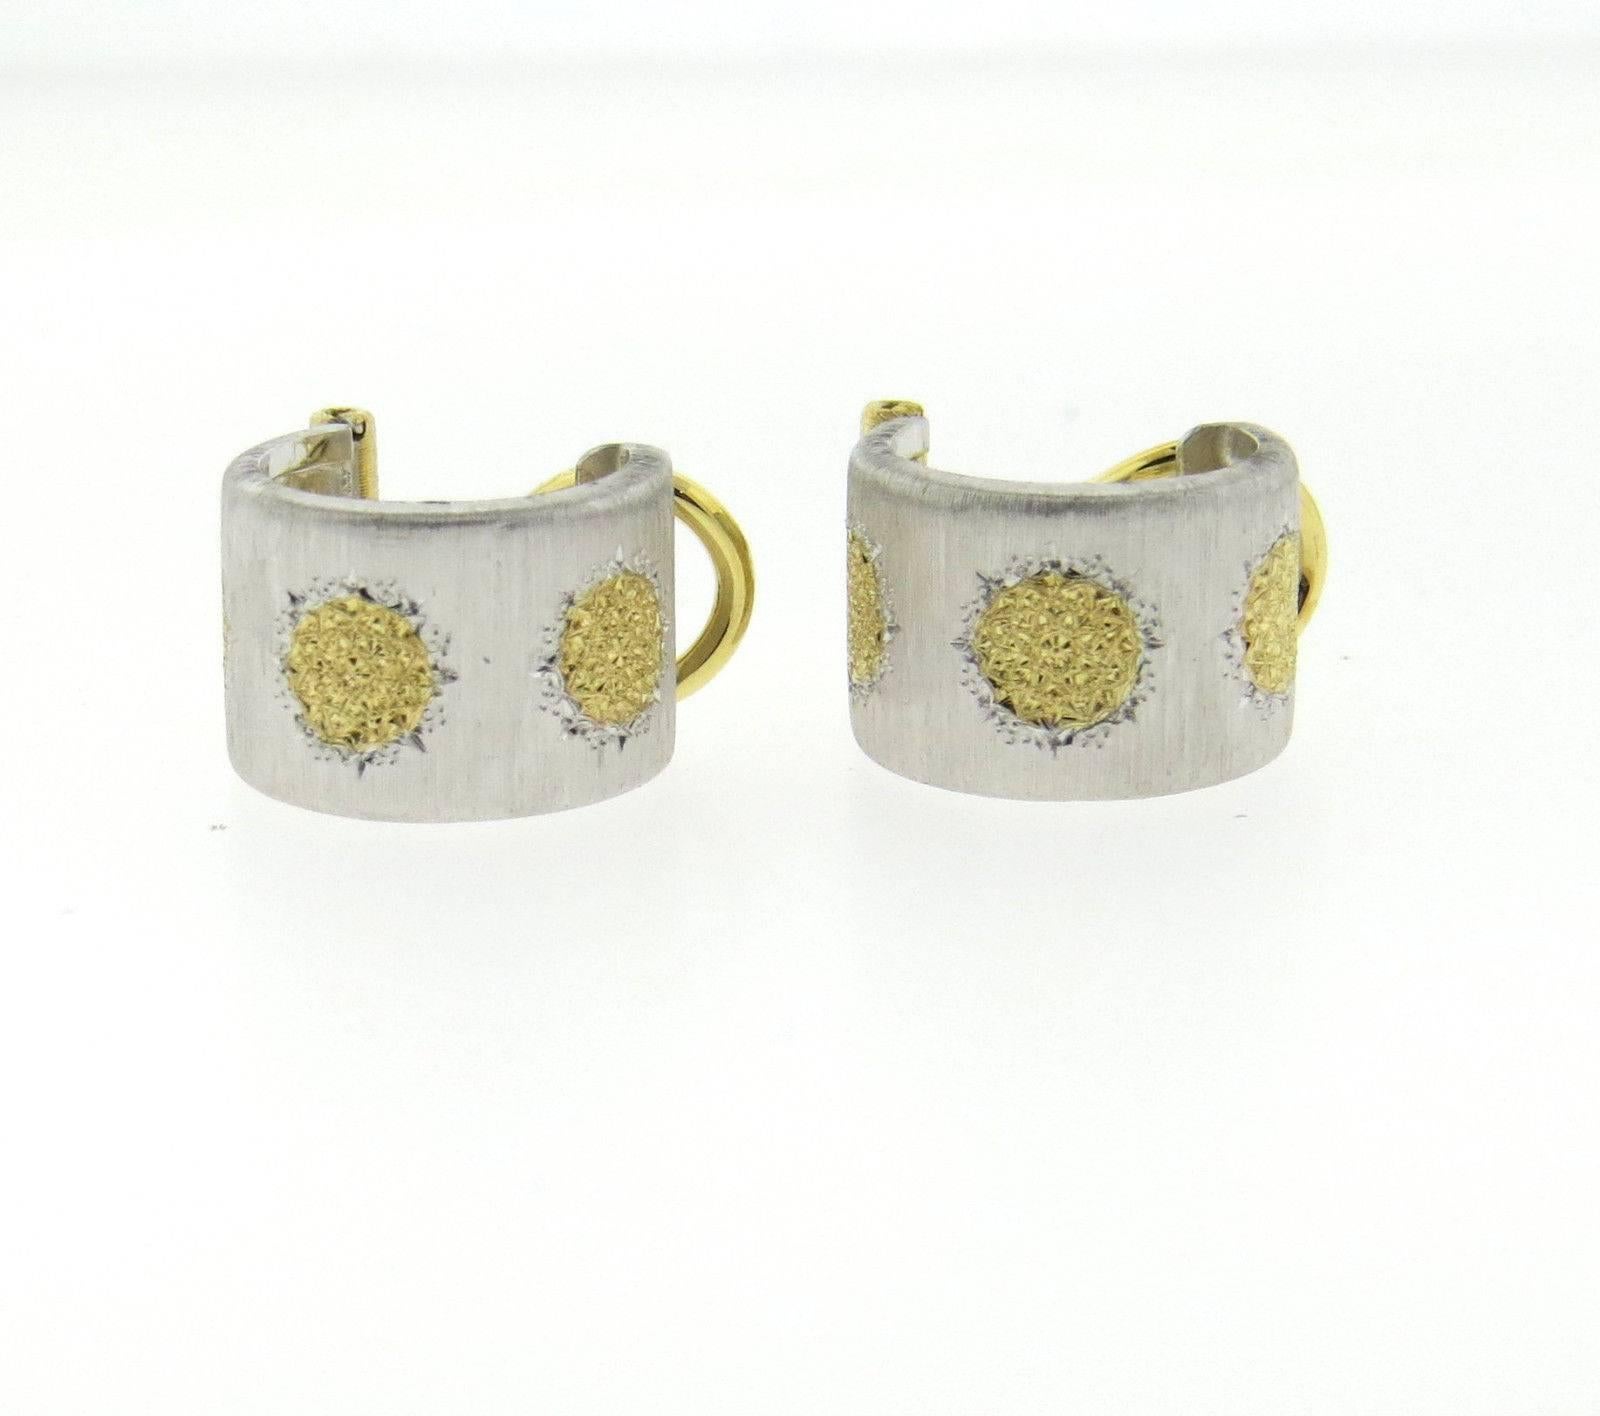 A pair of 18K yellow gold and sterling silver earrings by Buccellati.  The earrings measure 10mm wide and 14mm in diameter and weigh 7.8 grams.  Marked: Buccellati, 750, L5387.  Come with original Buccellati paperwork. Retail $4490.  